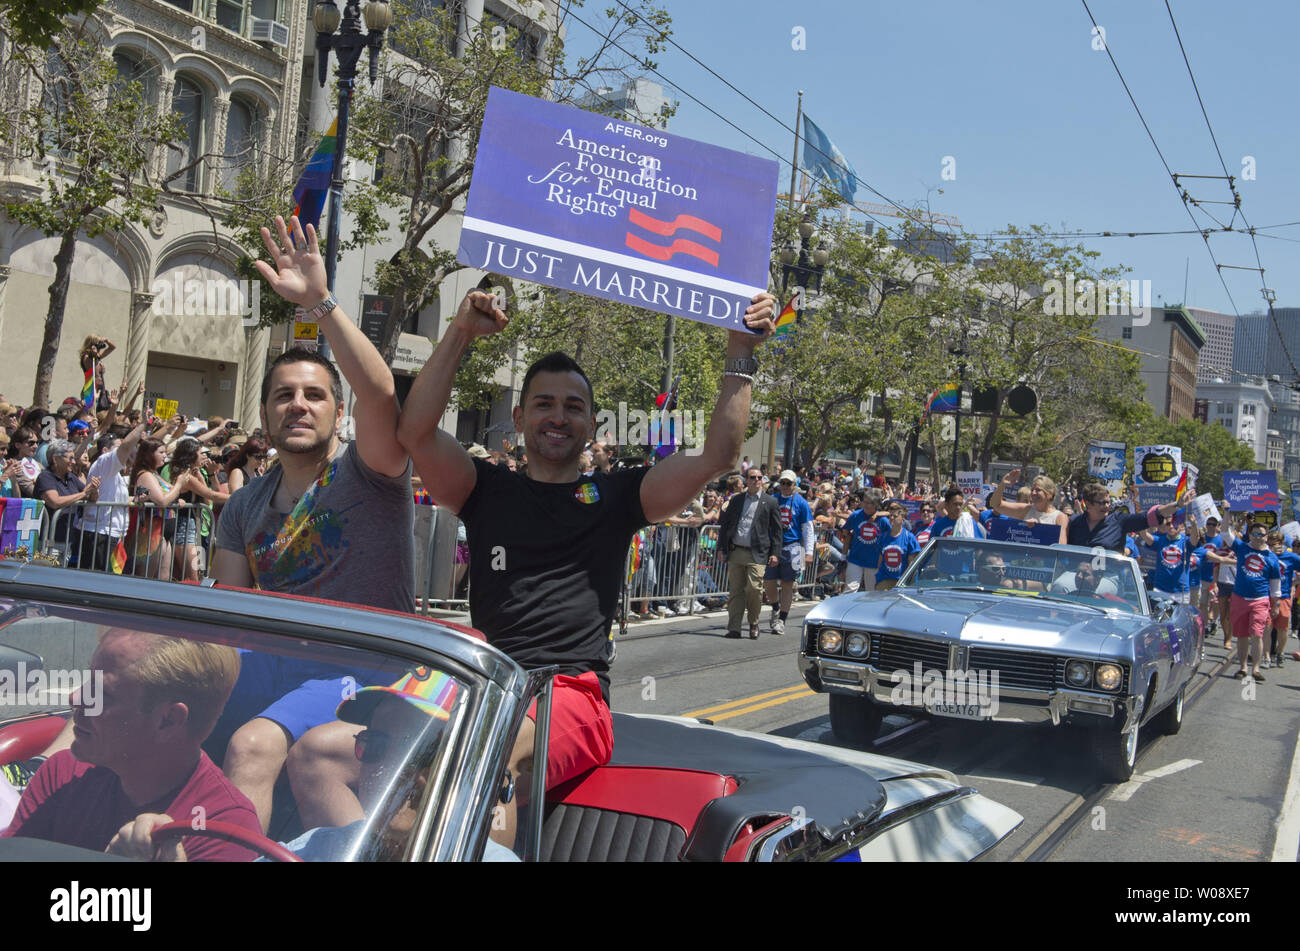 Proposition 8 lawsuit plaintiffs Paul Katami and Jeff Zarrillo ride along Market Street in the annual LGBT Pride Parade in San Francisco on June 30, 2013. Hundreds of thousands turned out to celebrate diversity, the Supreme Court decisions, and the resumption of gay marriages in the state of California.   UPI/Terry Schmitt Stock Photo